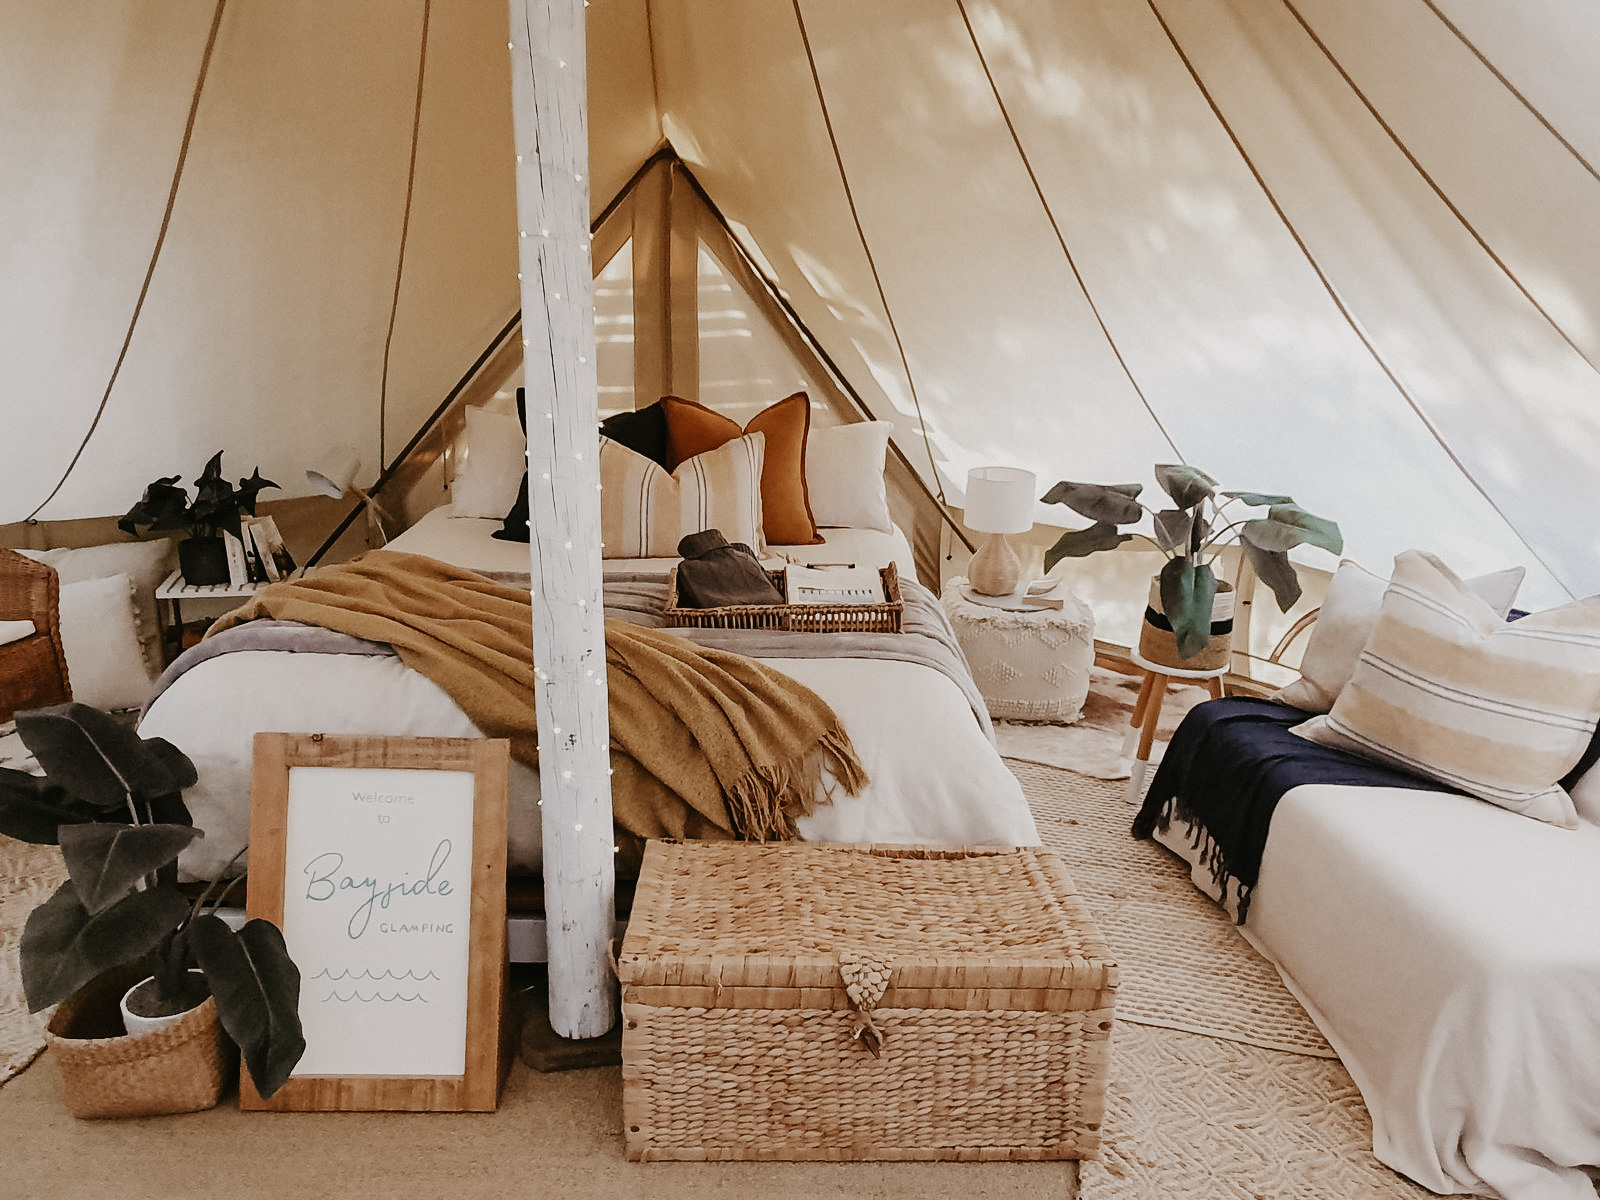 Bayside Glamping Tent